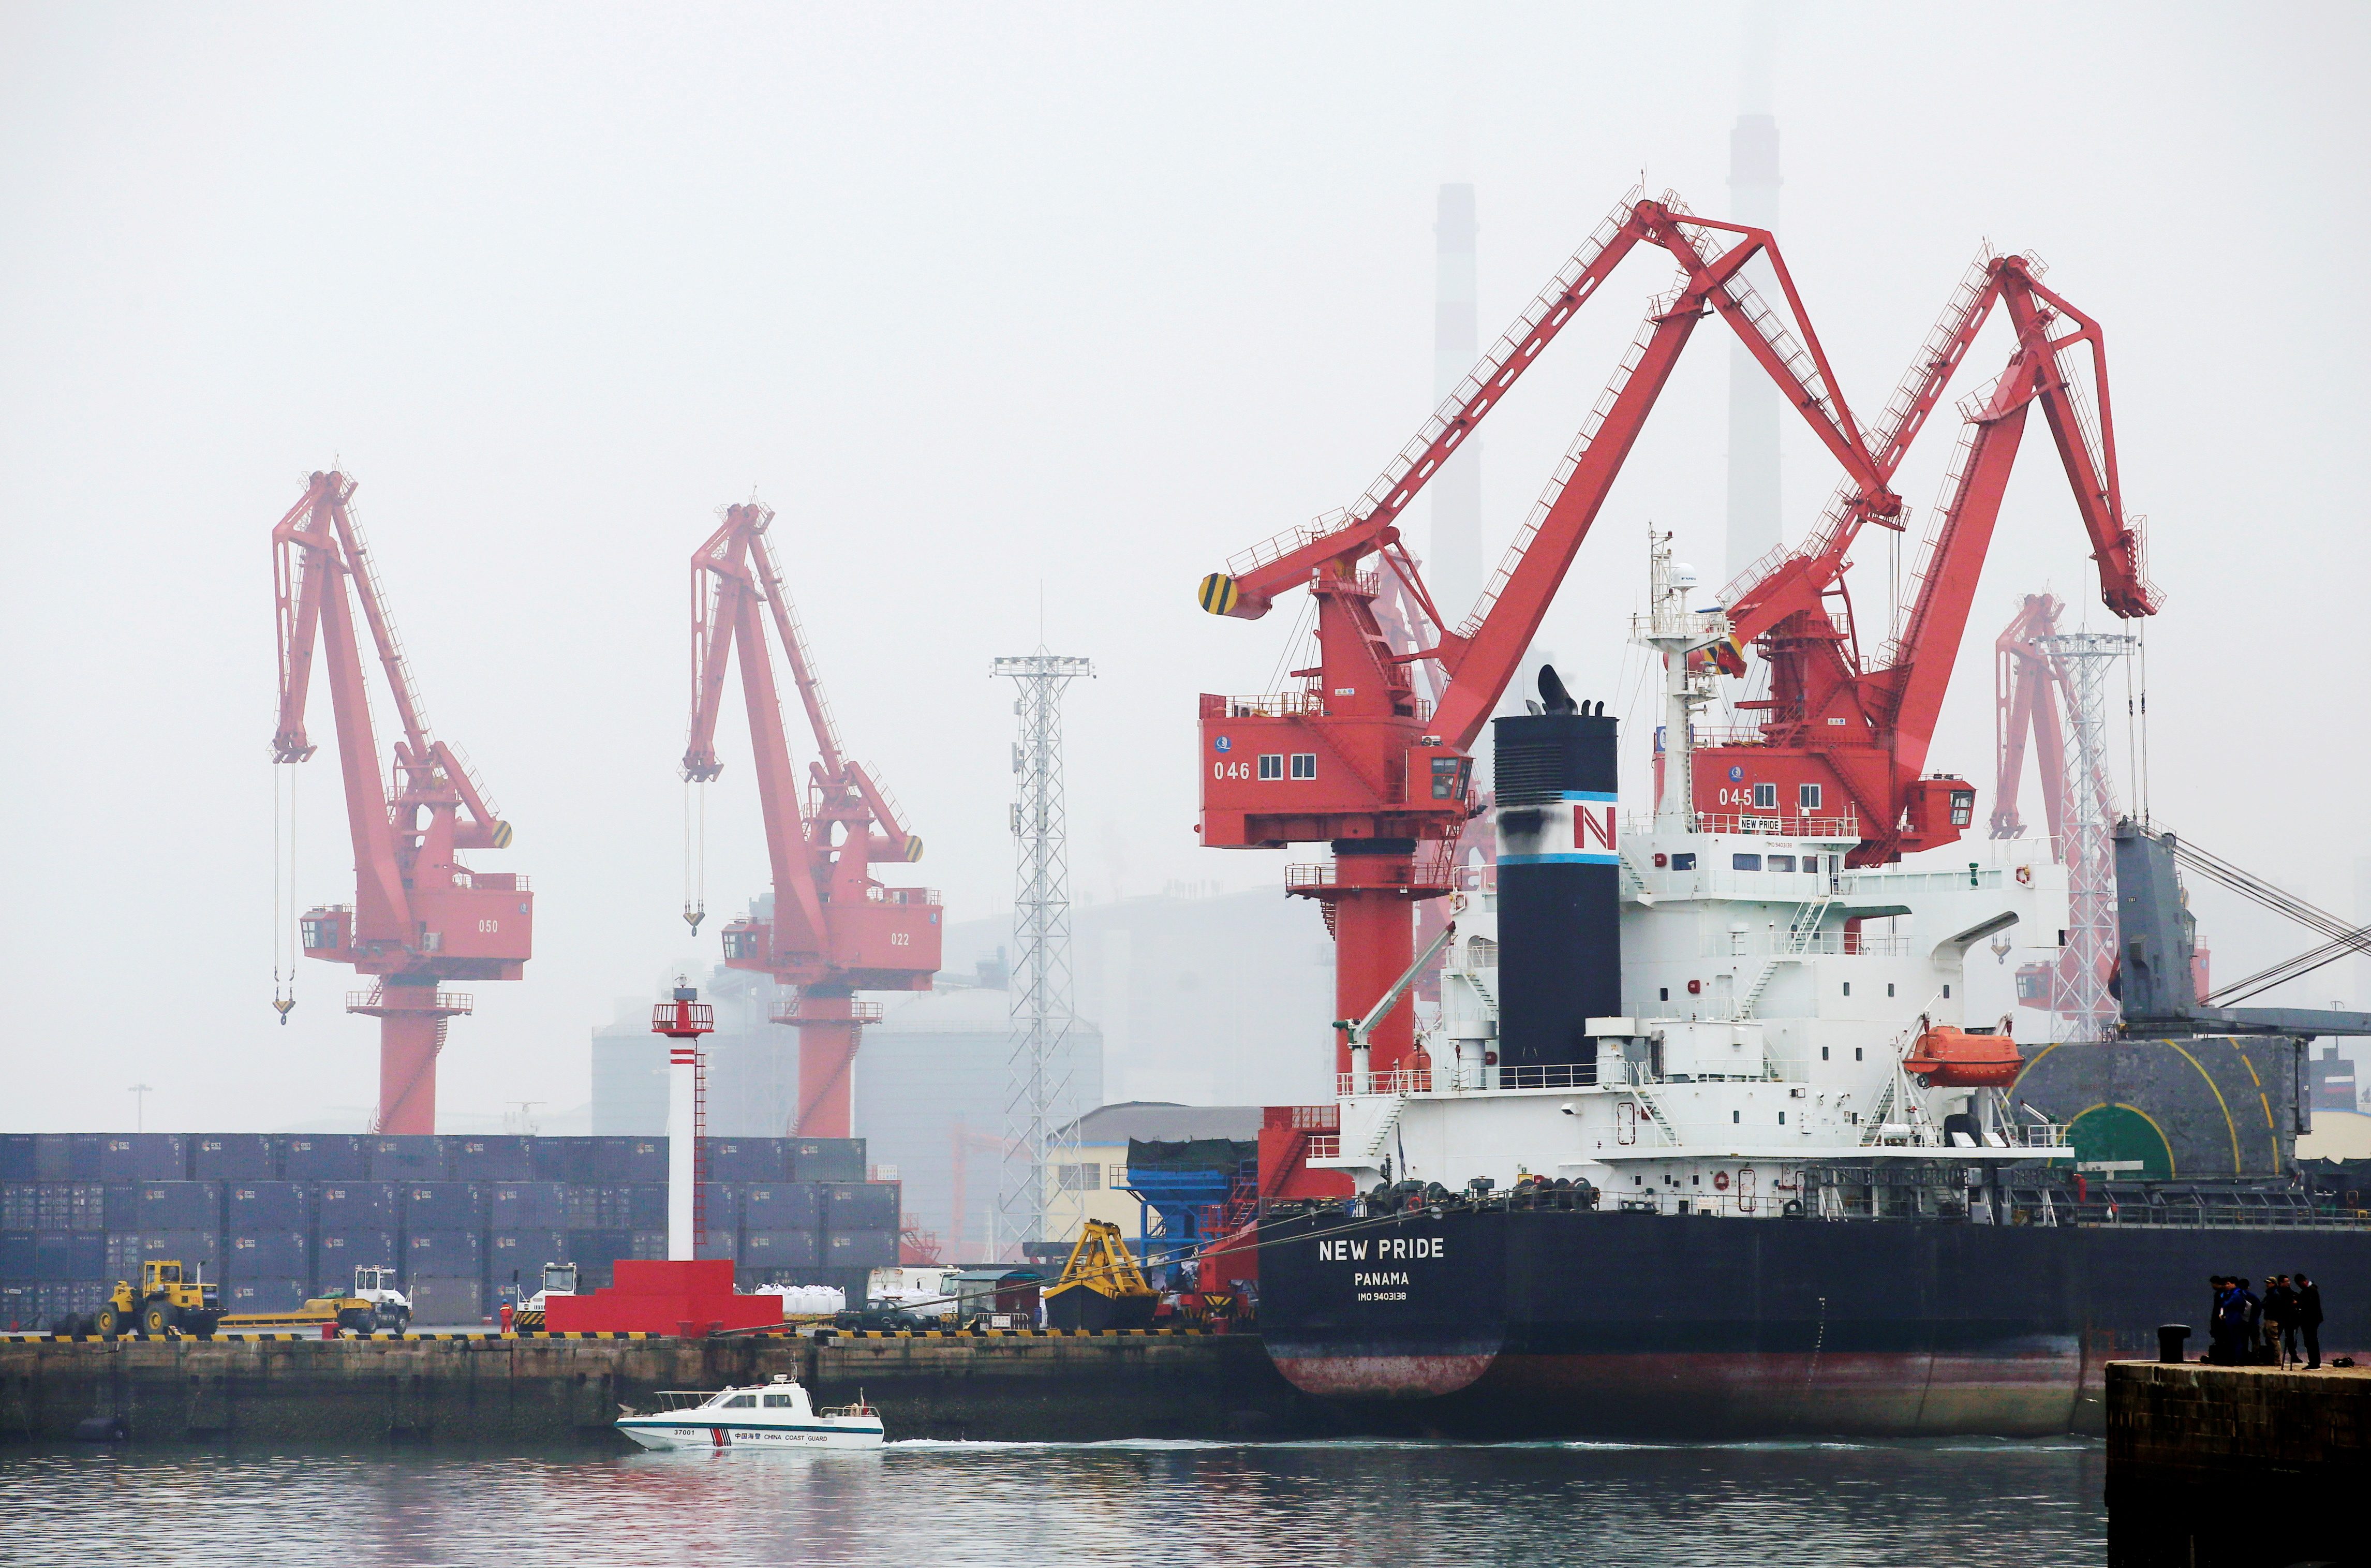 Oil spills outside China’s Qingdao port after ship collision